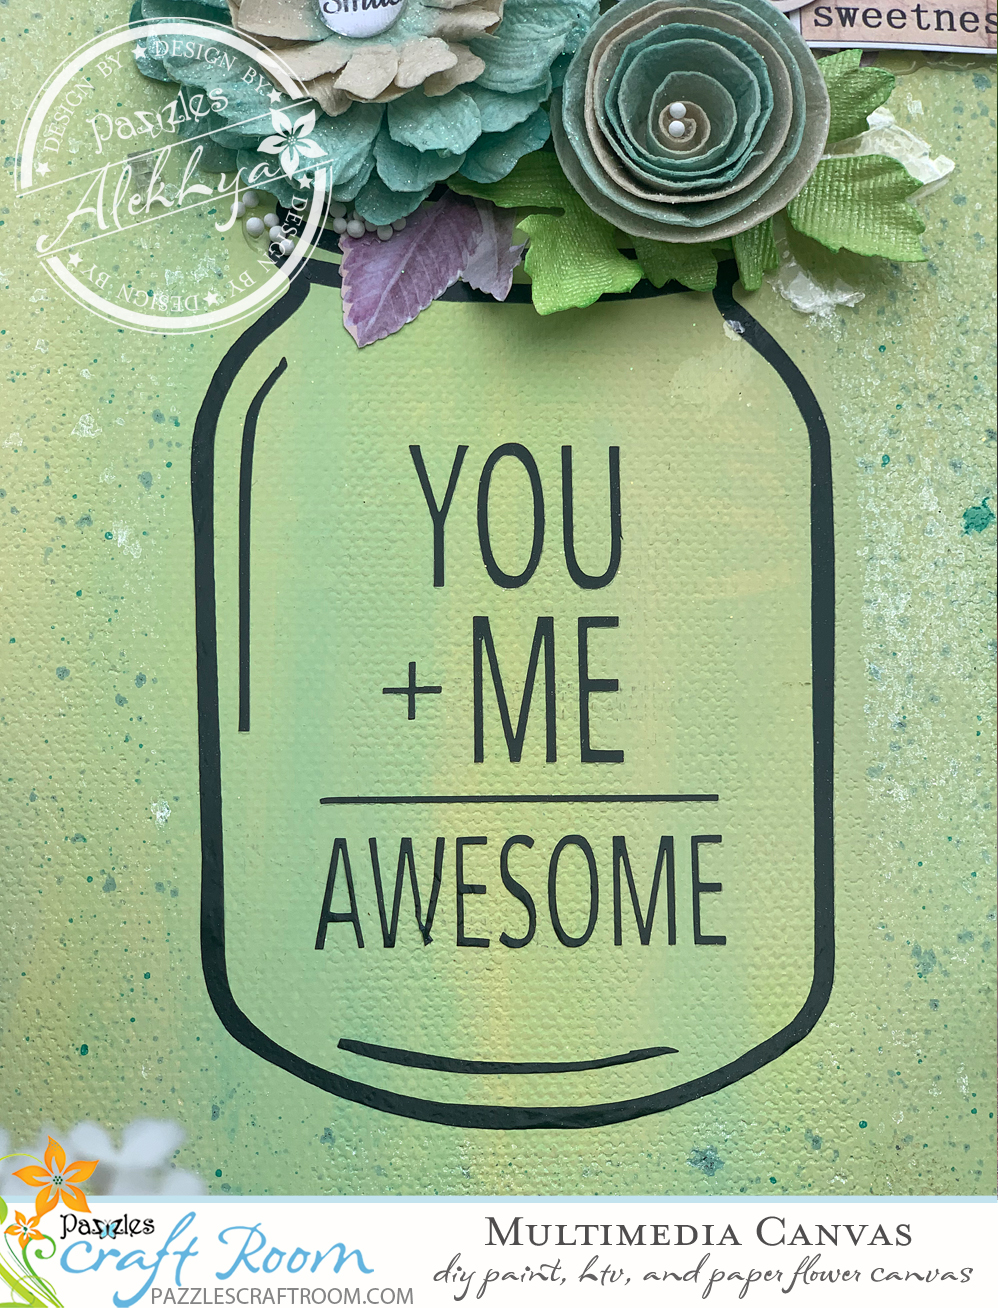 Pazzles DIY Craft Multimedia Canvas Flower HTV Mason Jar Painted Canvas with Paper Flowers You + Me = Awesome by Alekhya Yeluri